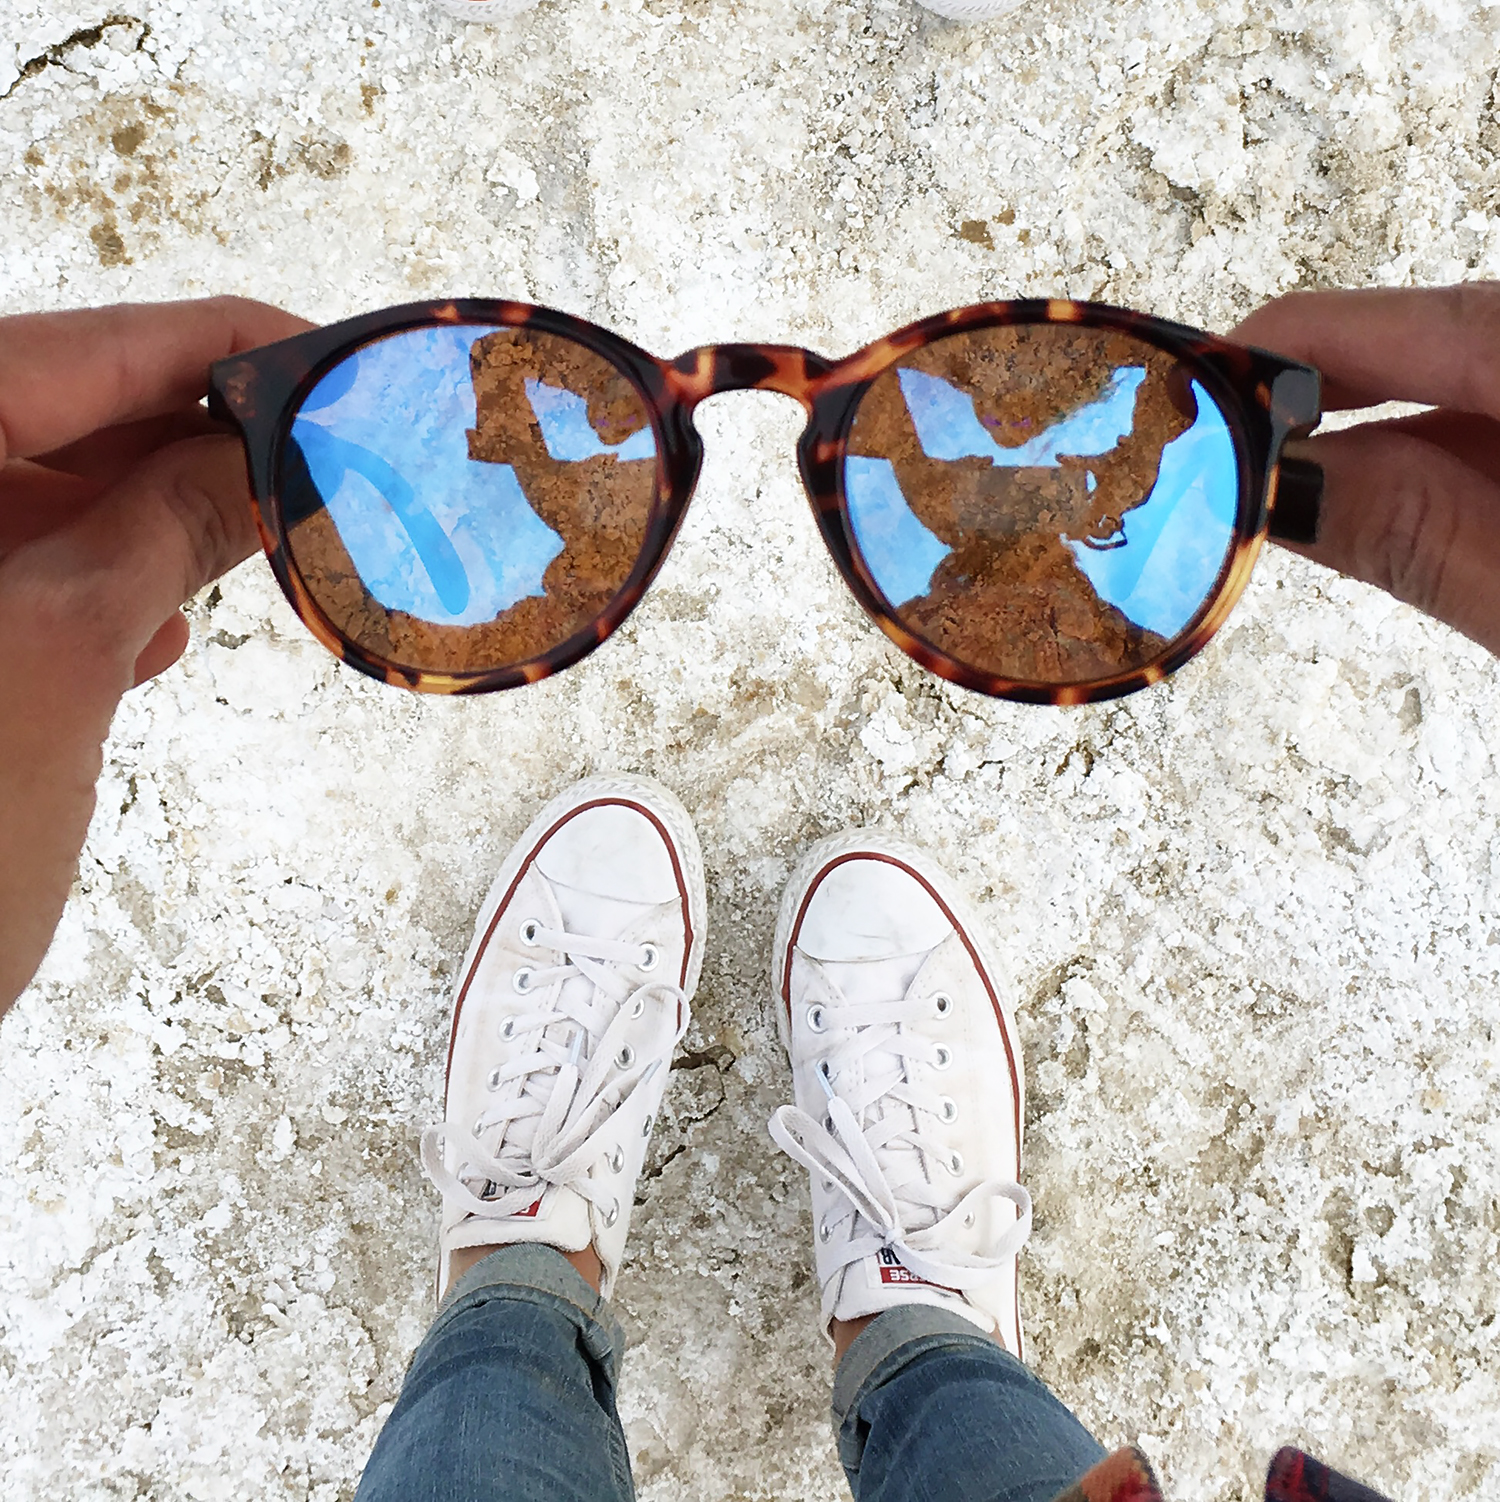 Dirty sand and dirty sneakers @sunskis @converse